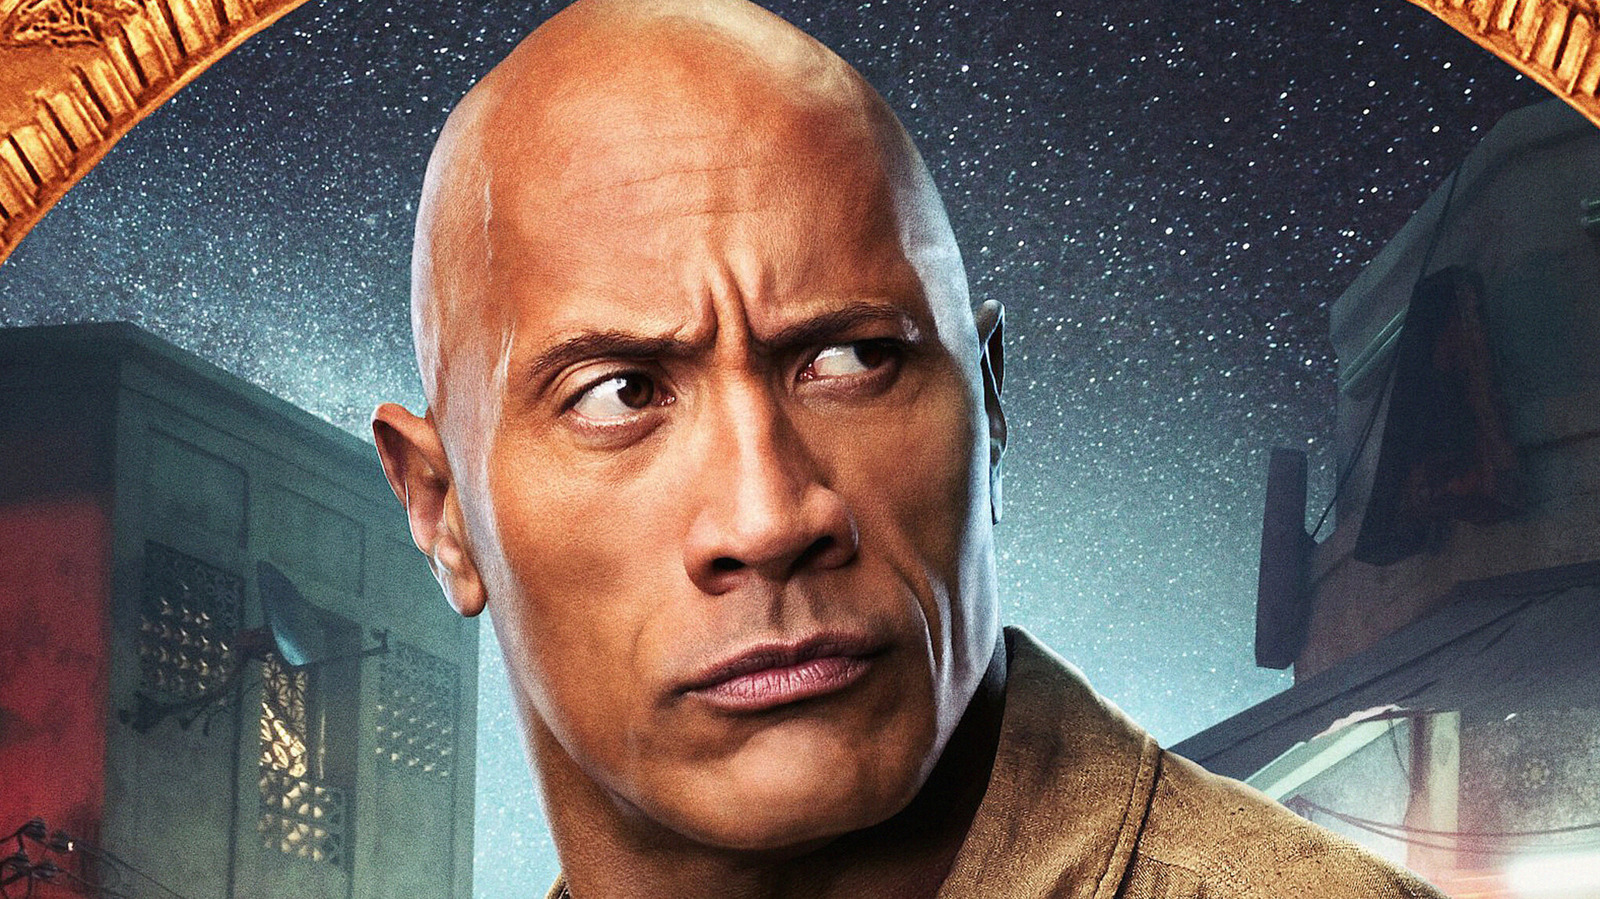 Movies Starring The Rock: Dwayne Johnson's Career in Posters